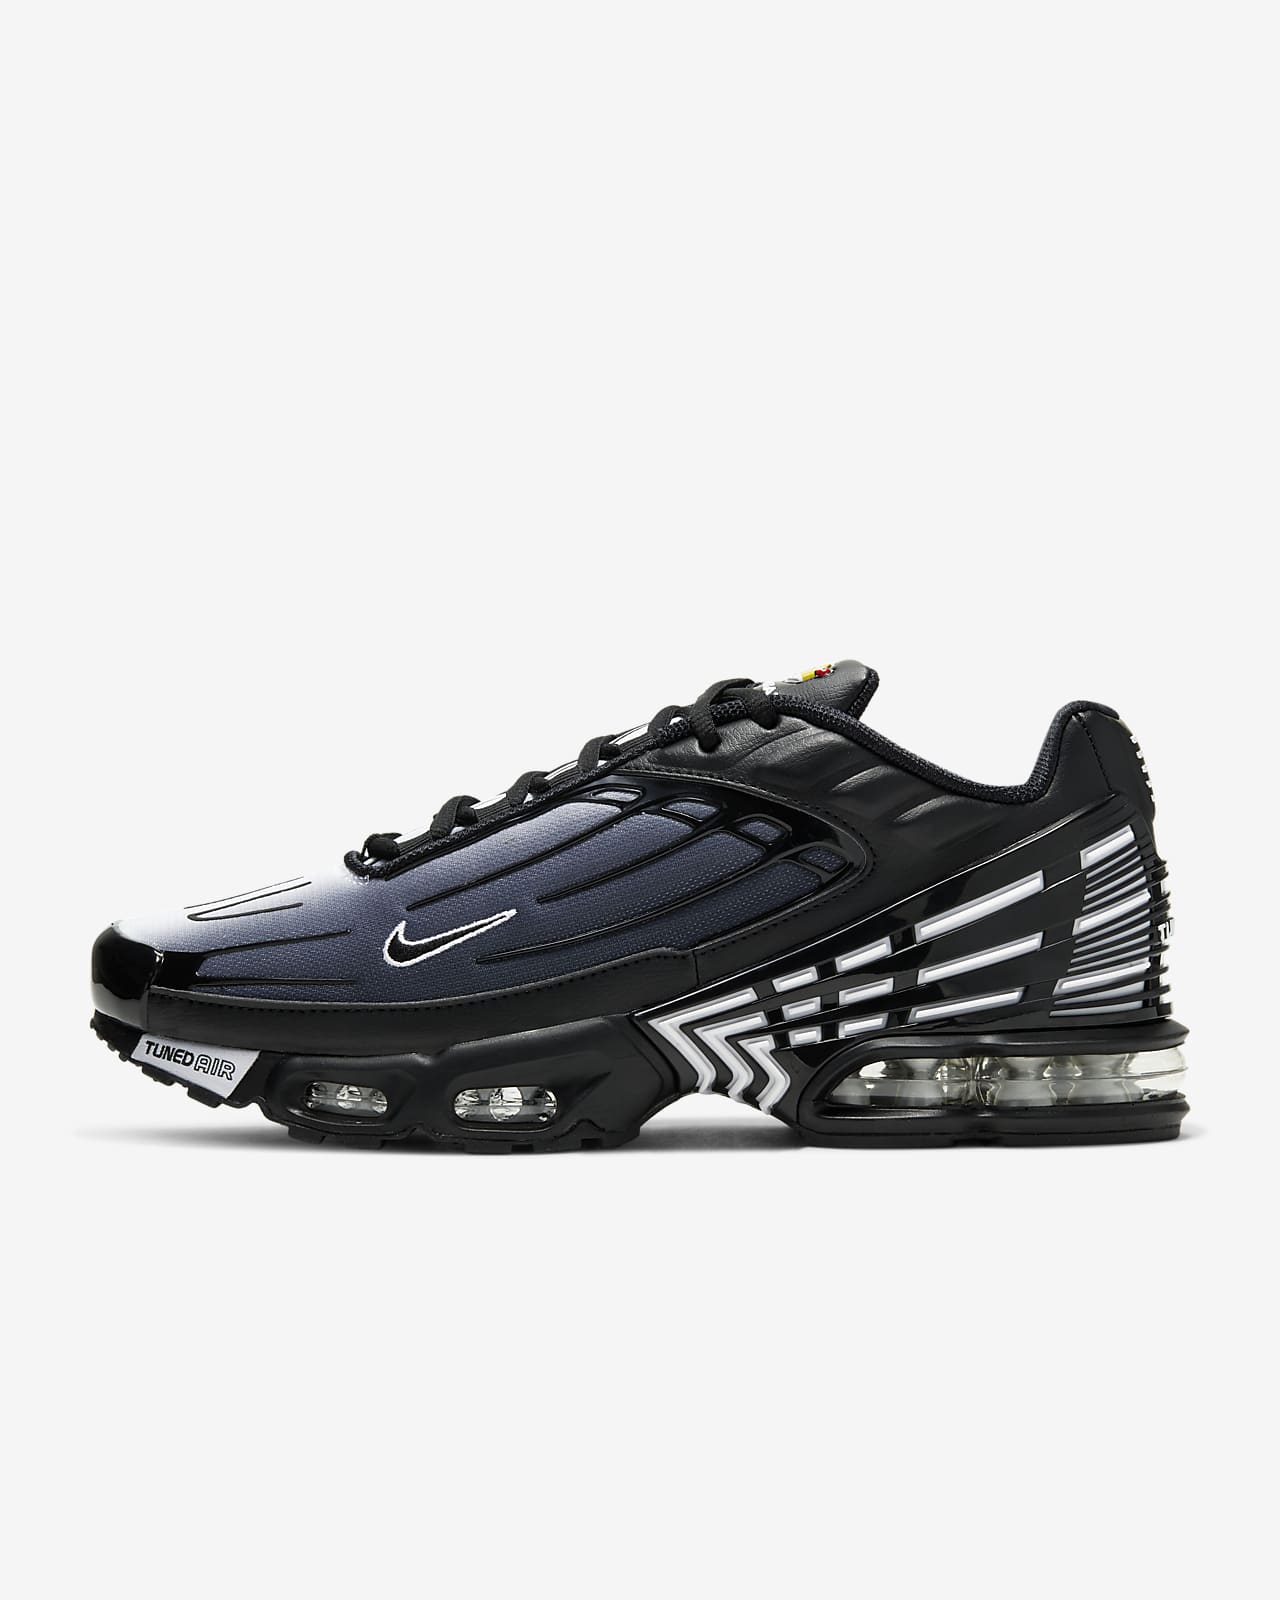 White And Black Nike Air Max Plus Clearance Sale, UP TO 64% OFF